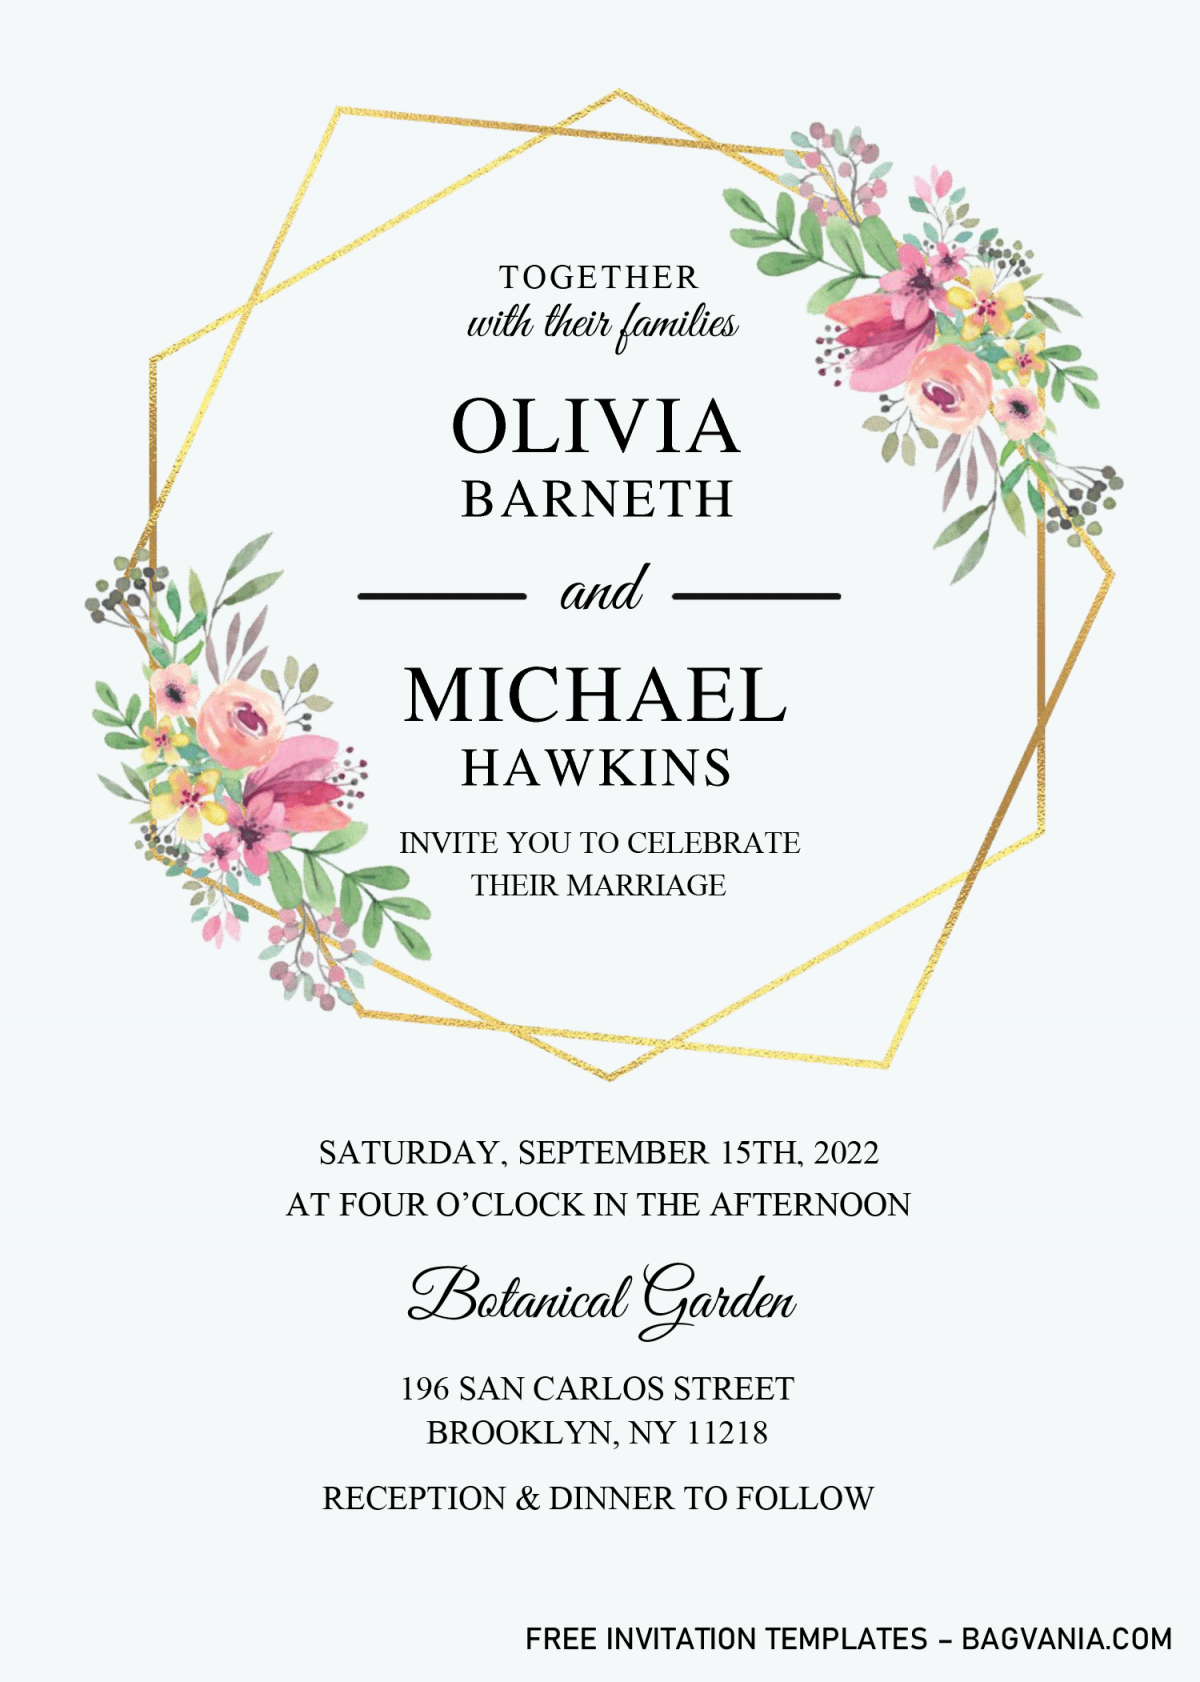 Gold Geometric Floral Invitation Templates - Editable With Microsoft Word and has gold geometric frame